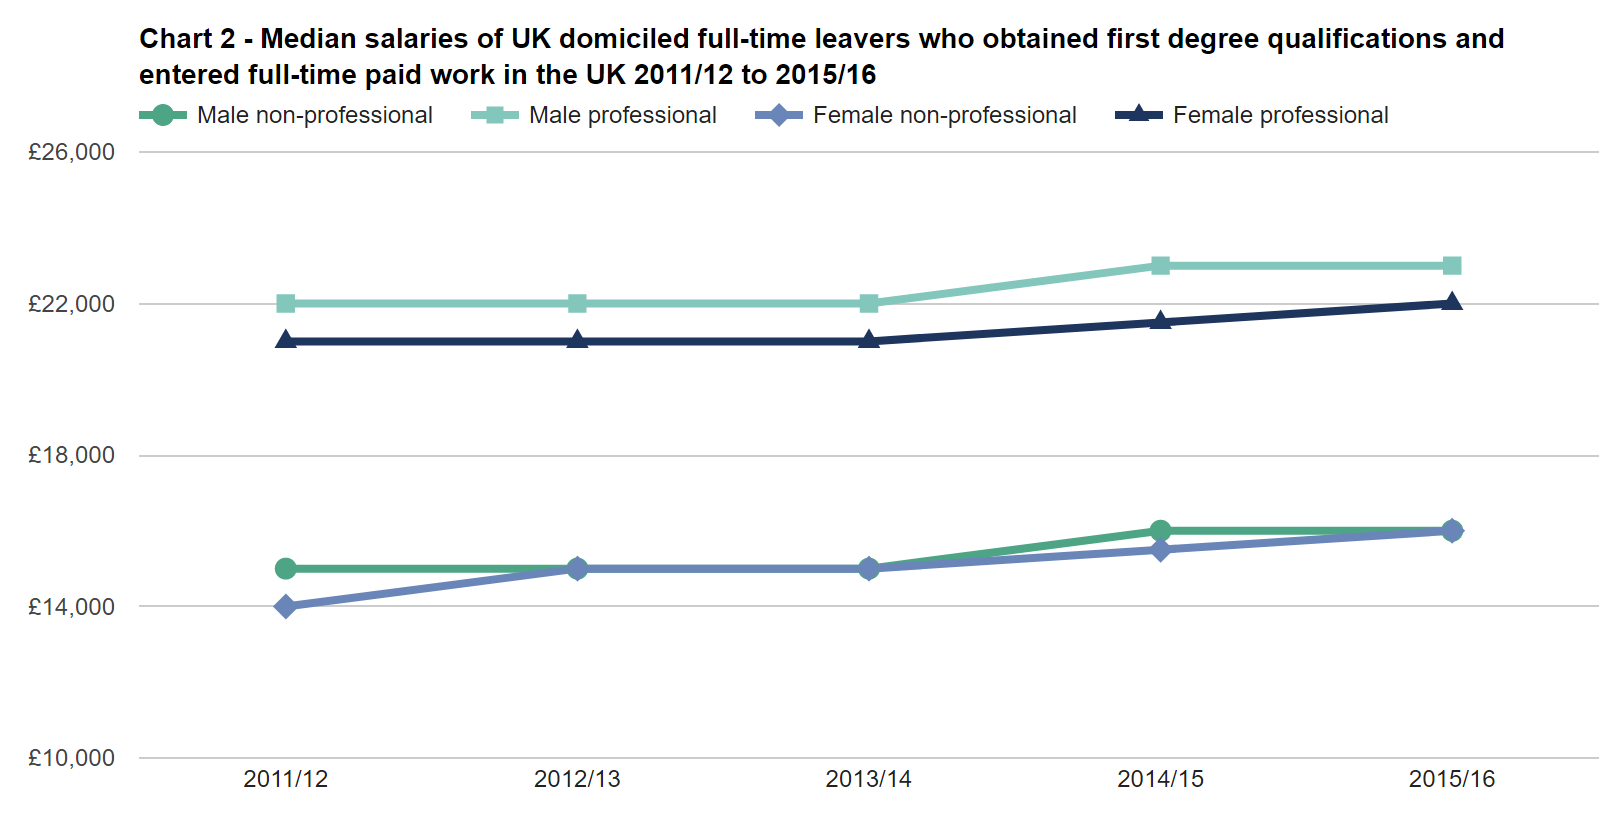 SFR245: Chart 2 - Median salaries of UK domiciled full-time leavers who obtained first degree qualifications and<br />
entered full-time paid work in the UK 2011/12 to 2015/16